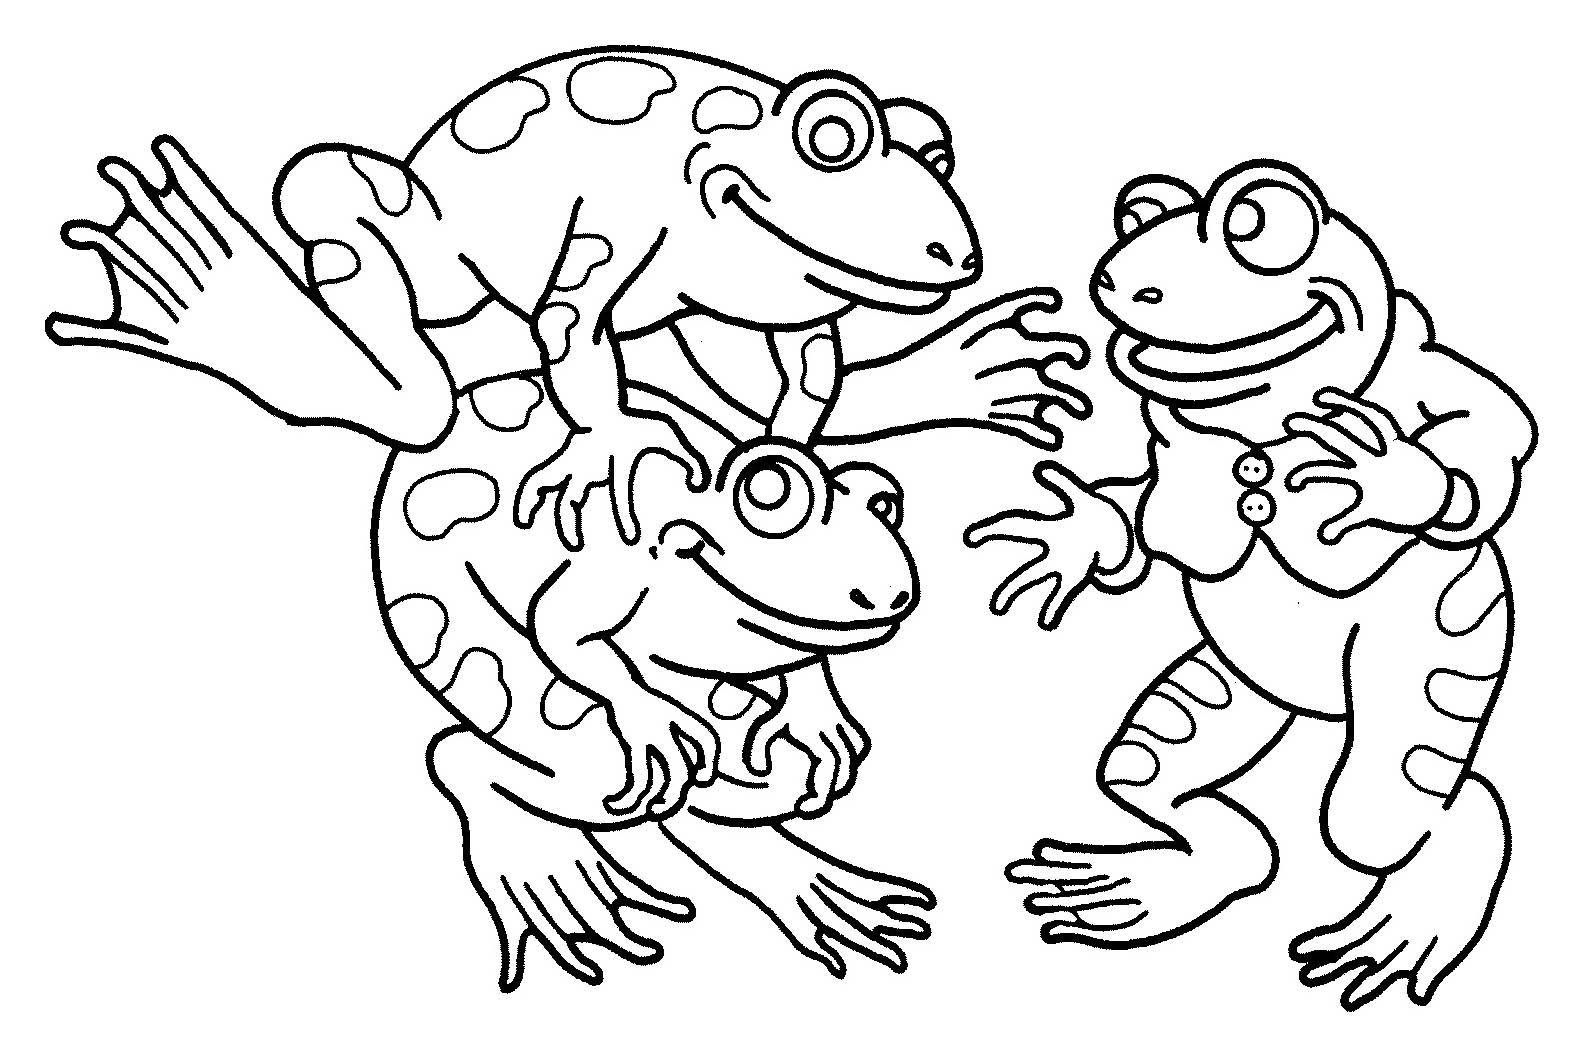 Color this beautiful frog coloring page with your favorite colors